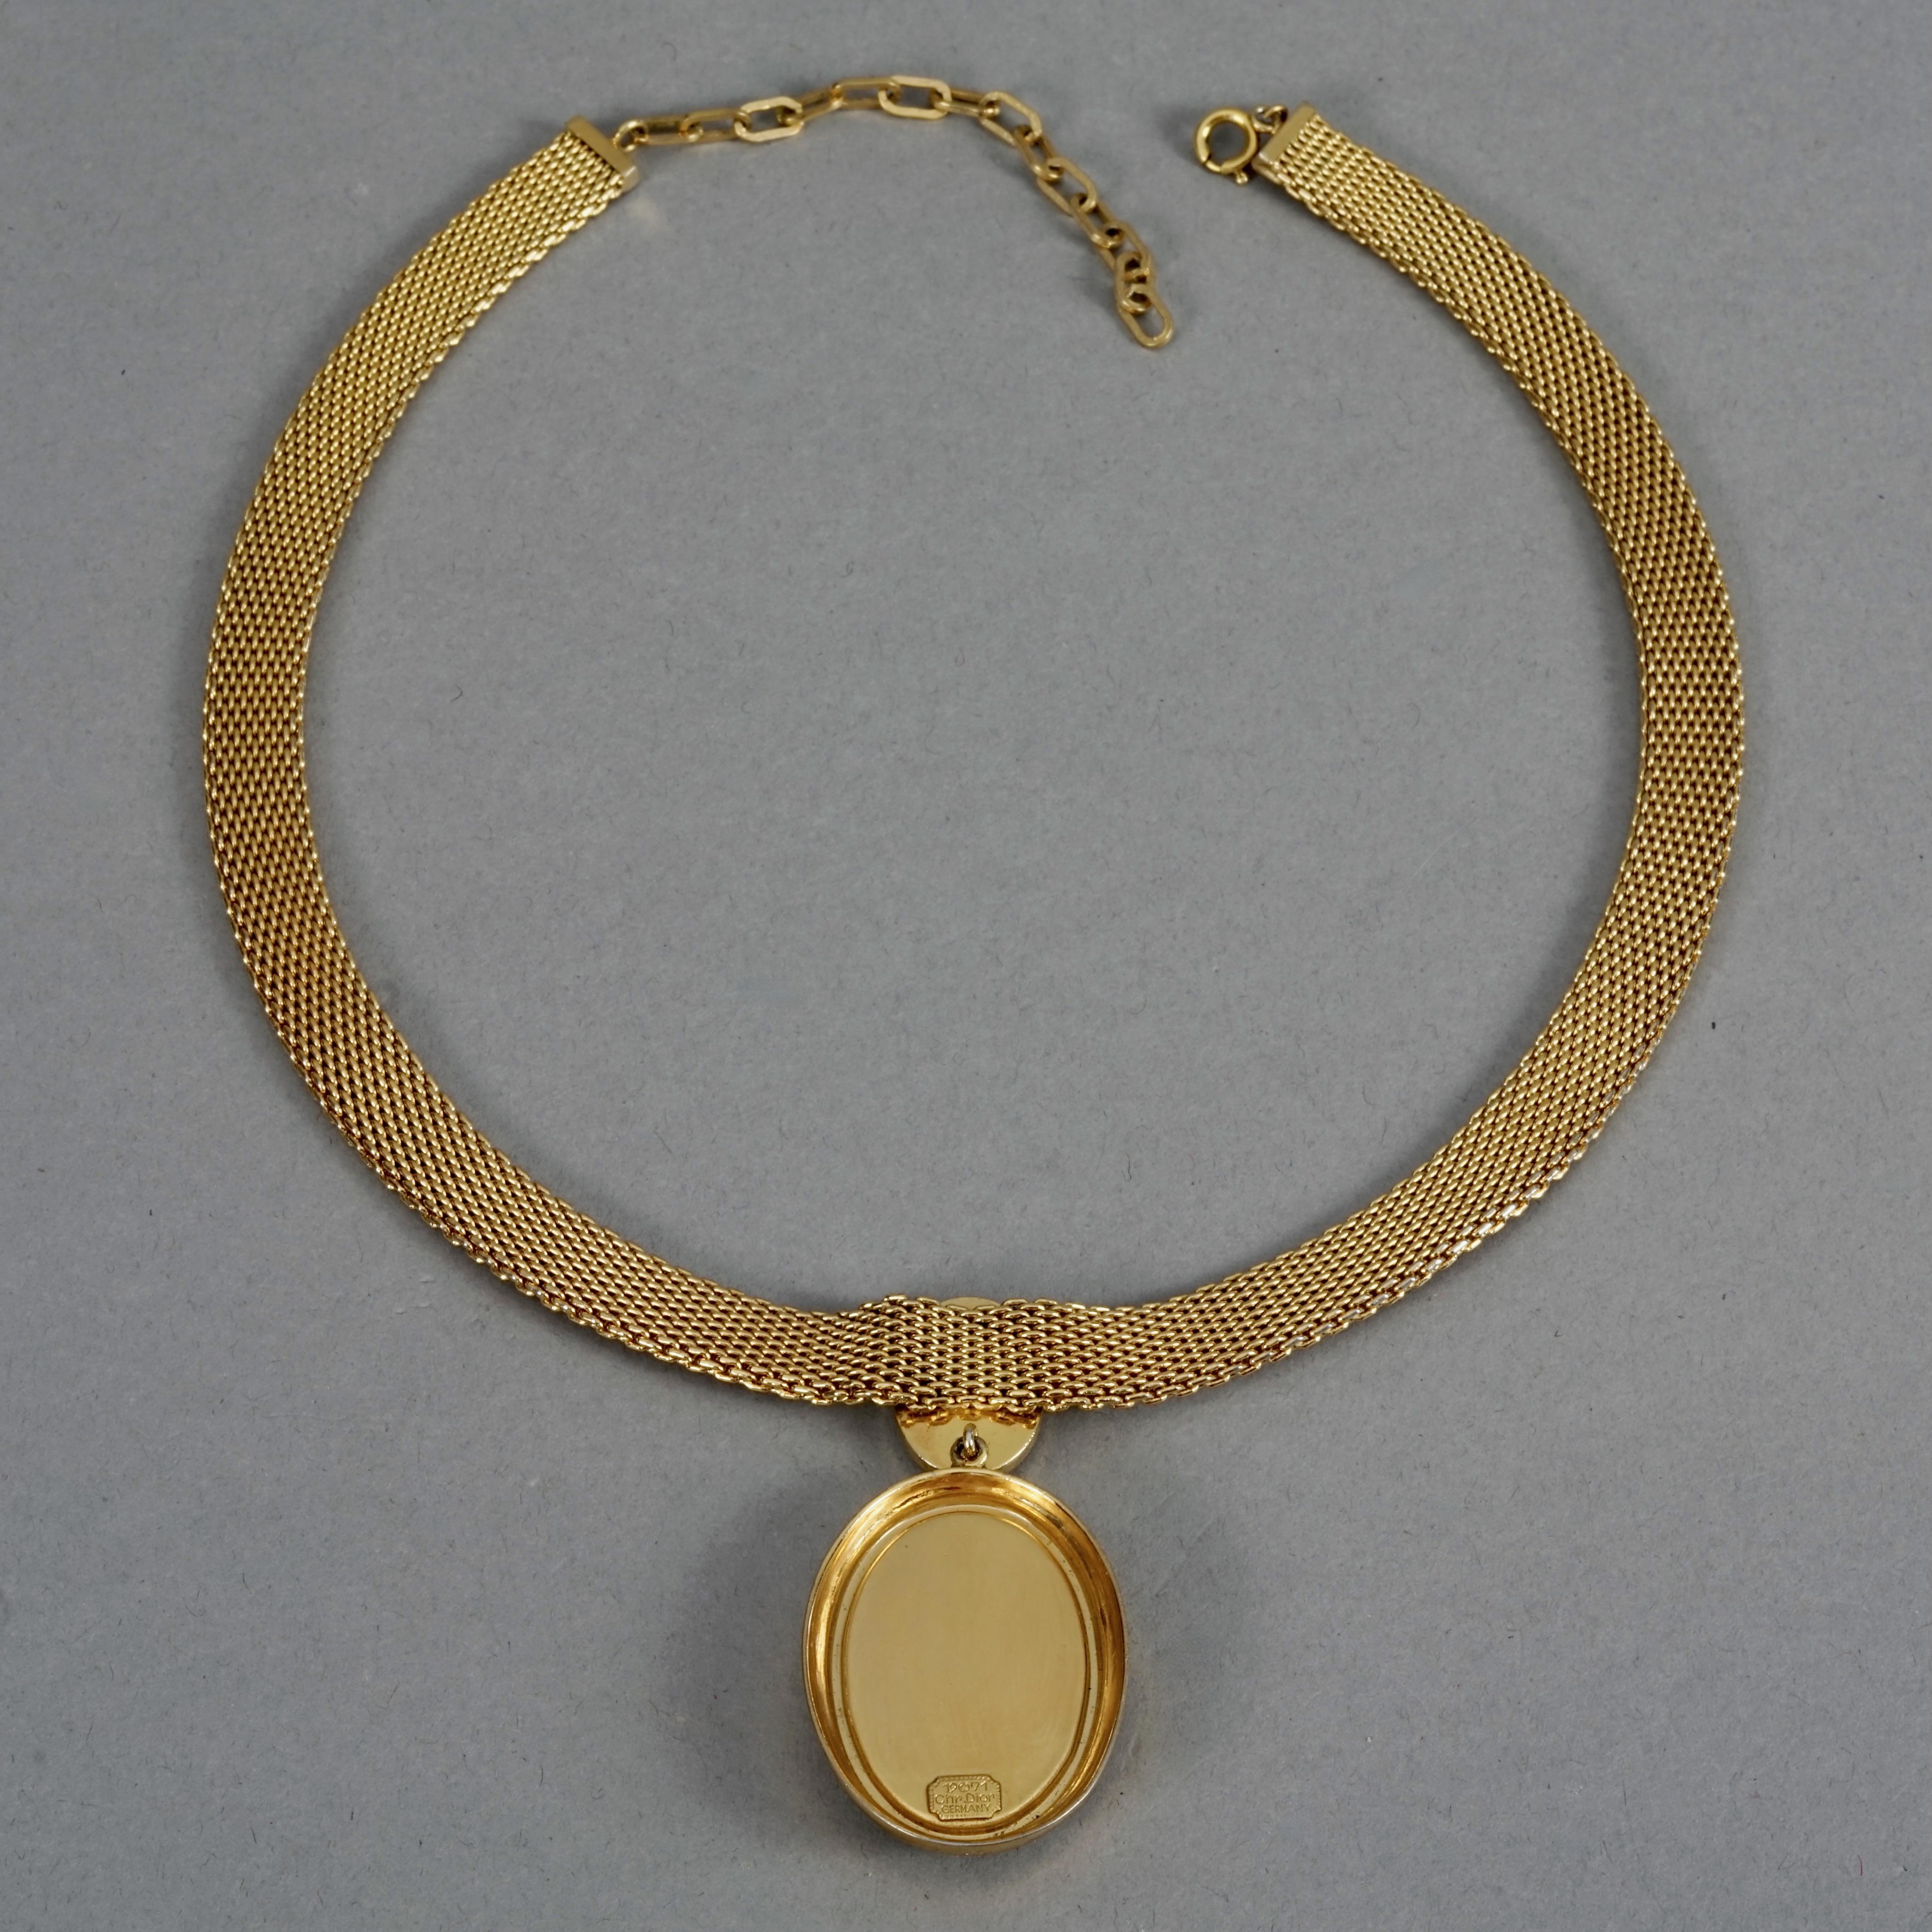 Vintage 1971 CHRISTIAN DIOR Double Oval Green Pendant Chain Necklace For Sale 6